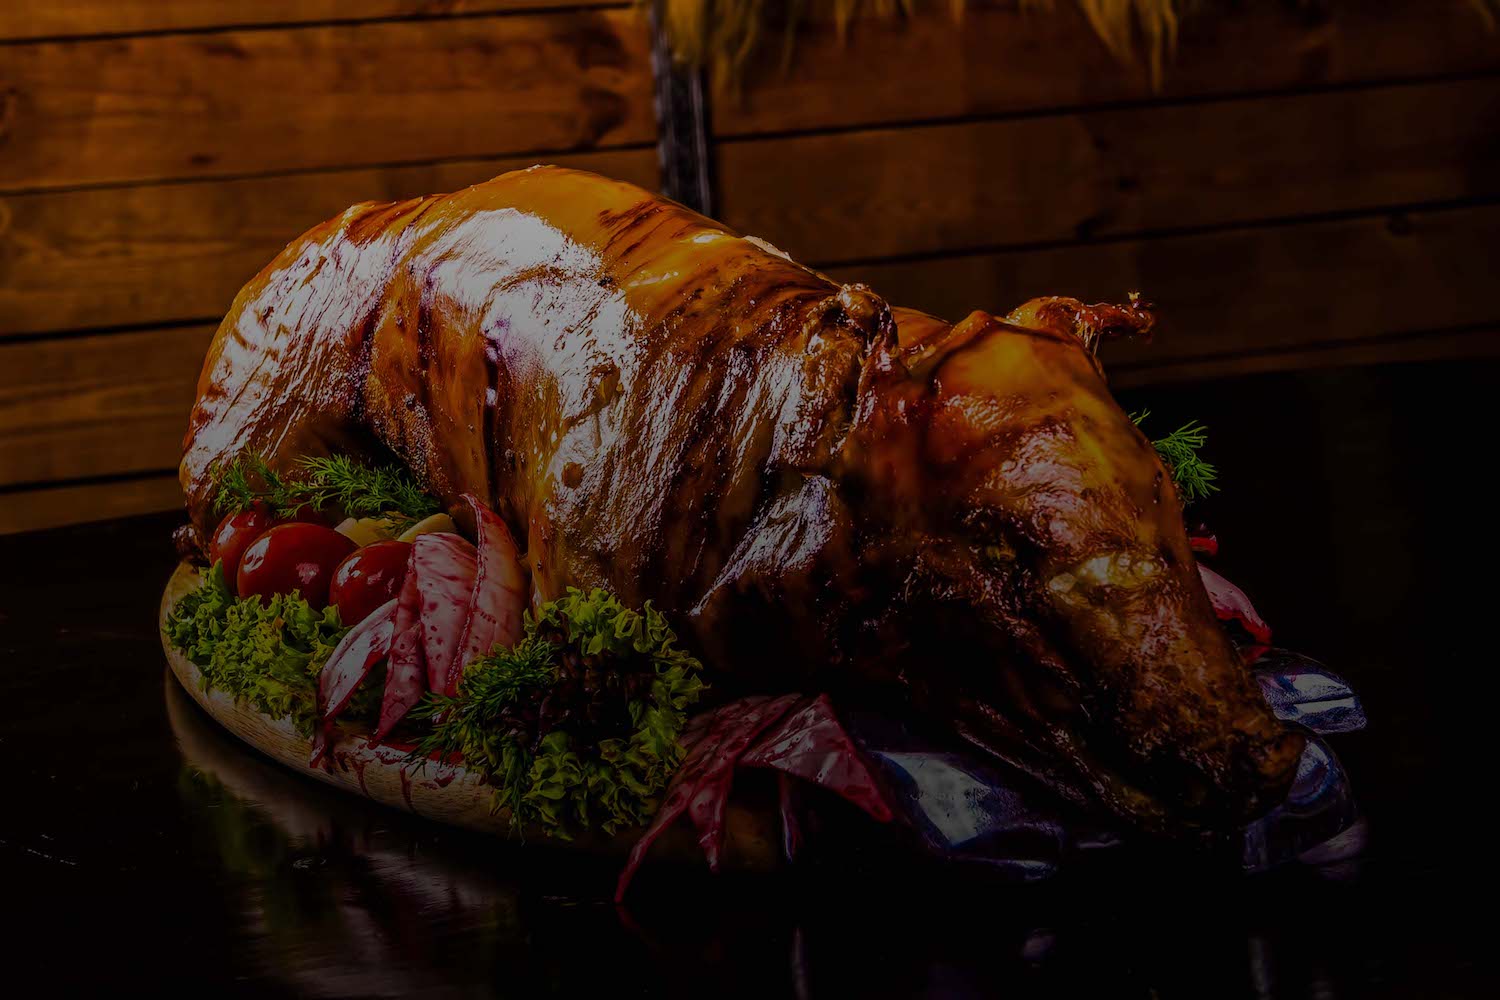 A roasted whole pig with a shiny, glazed exterior is placed on a platter, surrounded by decorative greens, red leaves, and cherry tomatoes. The background features wooden paneling, indicating a warm, rustic setting.